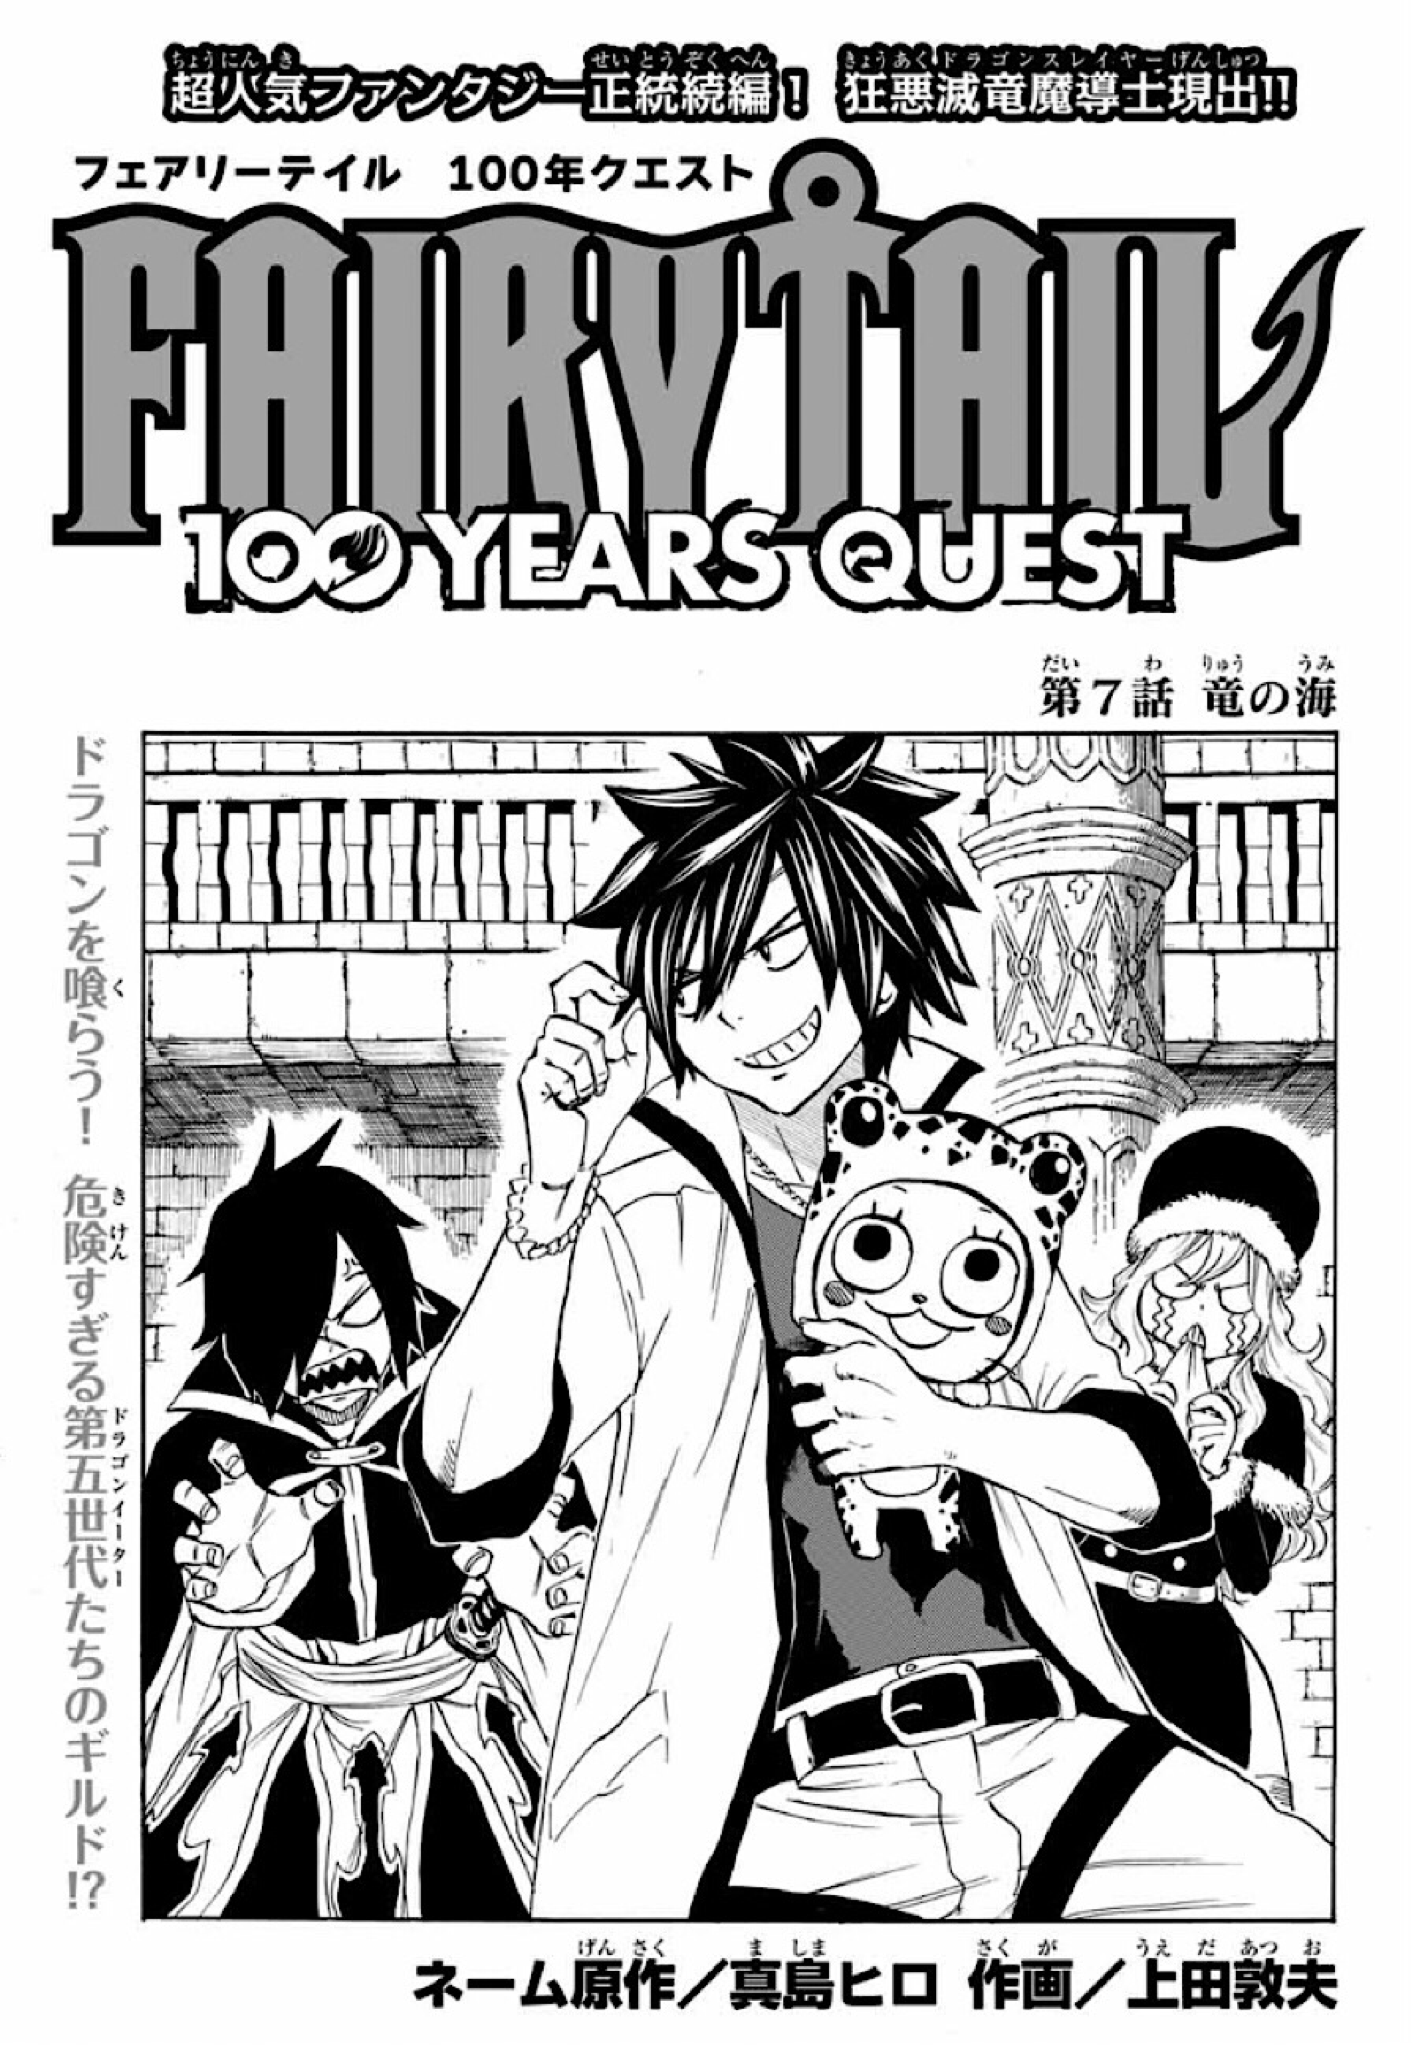 Fairy Tail 100 Years Quest Chapter 7 Fairy Tail Wiki Fandom